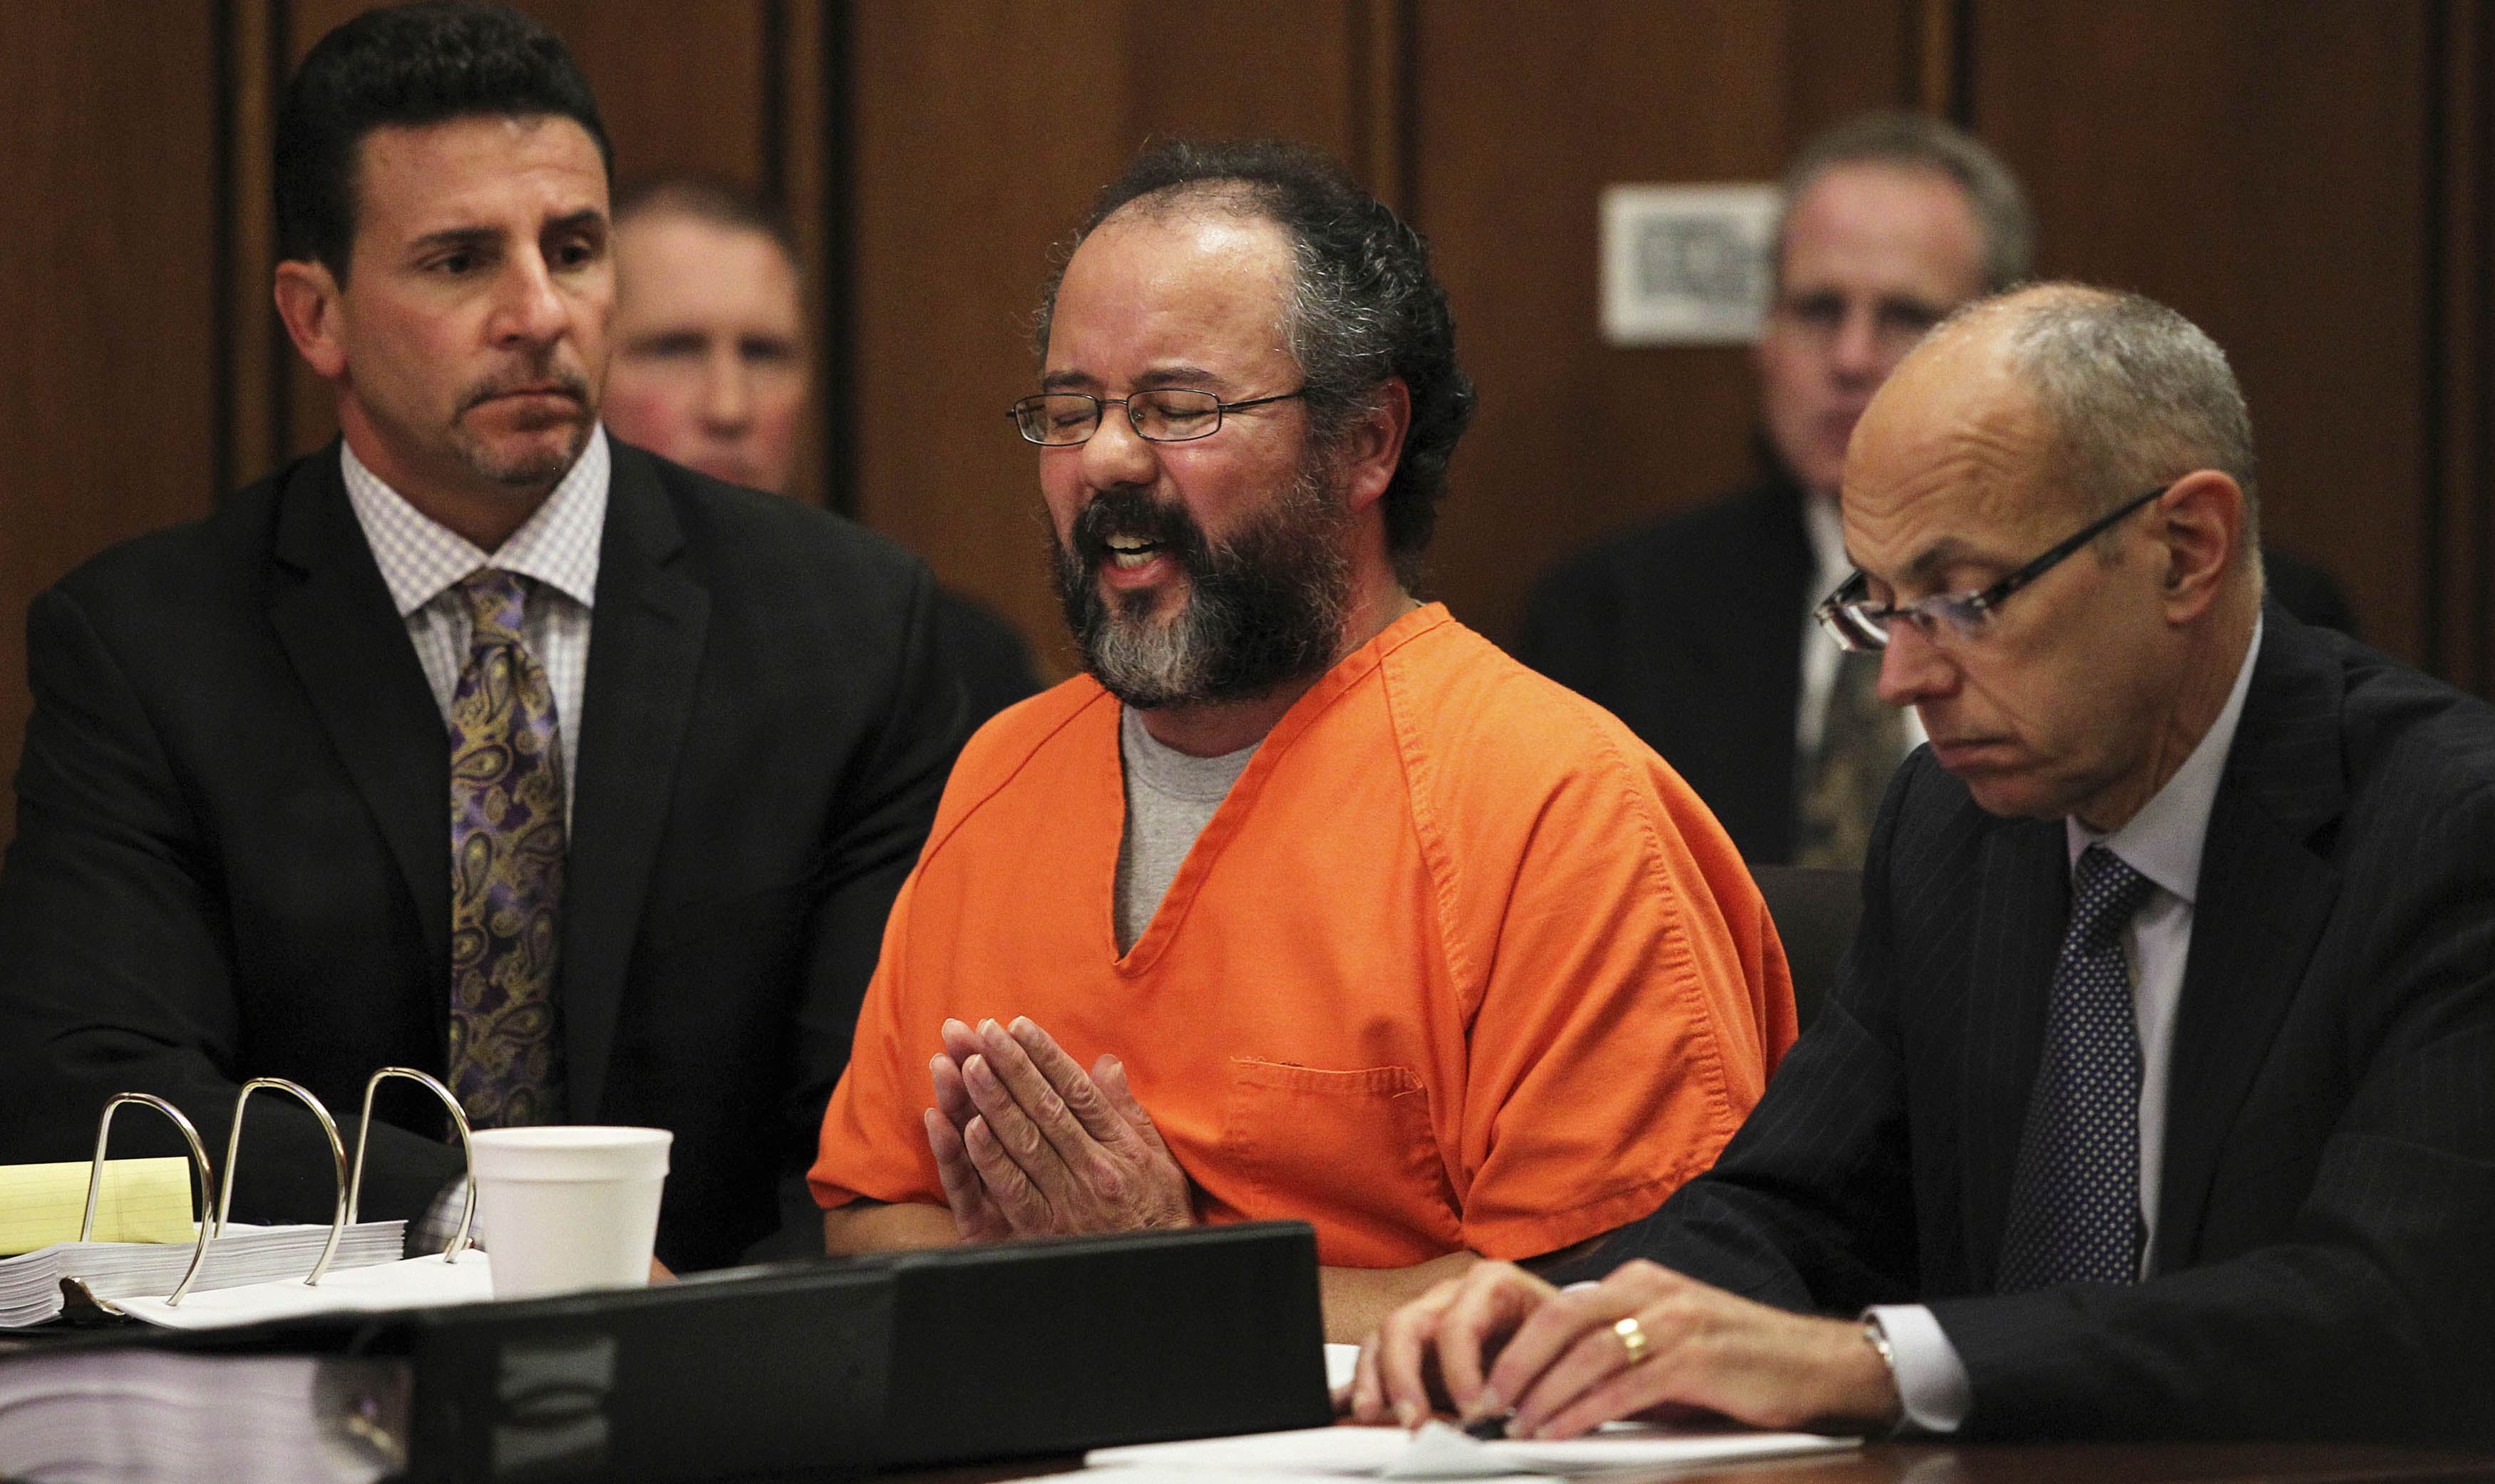 The hostage-taker, Ariel Castro, breaks down in court while talking about the child he fathered with Amanda Berry. Photo: Reuters